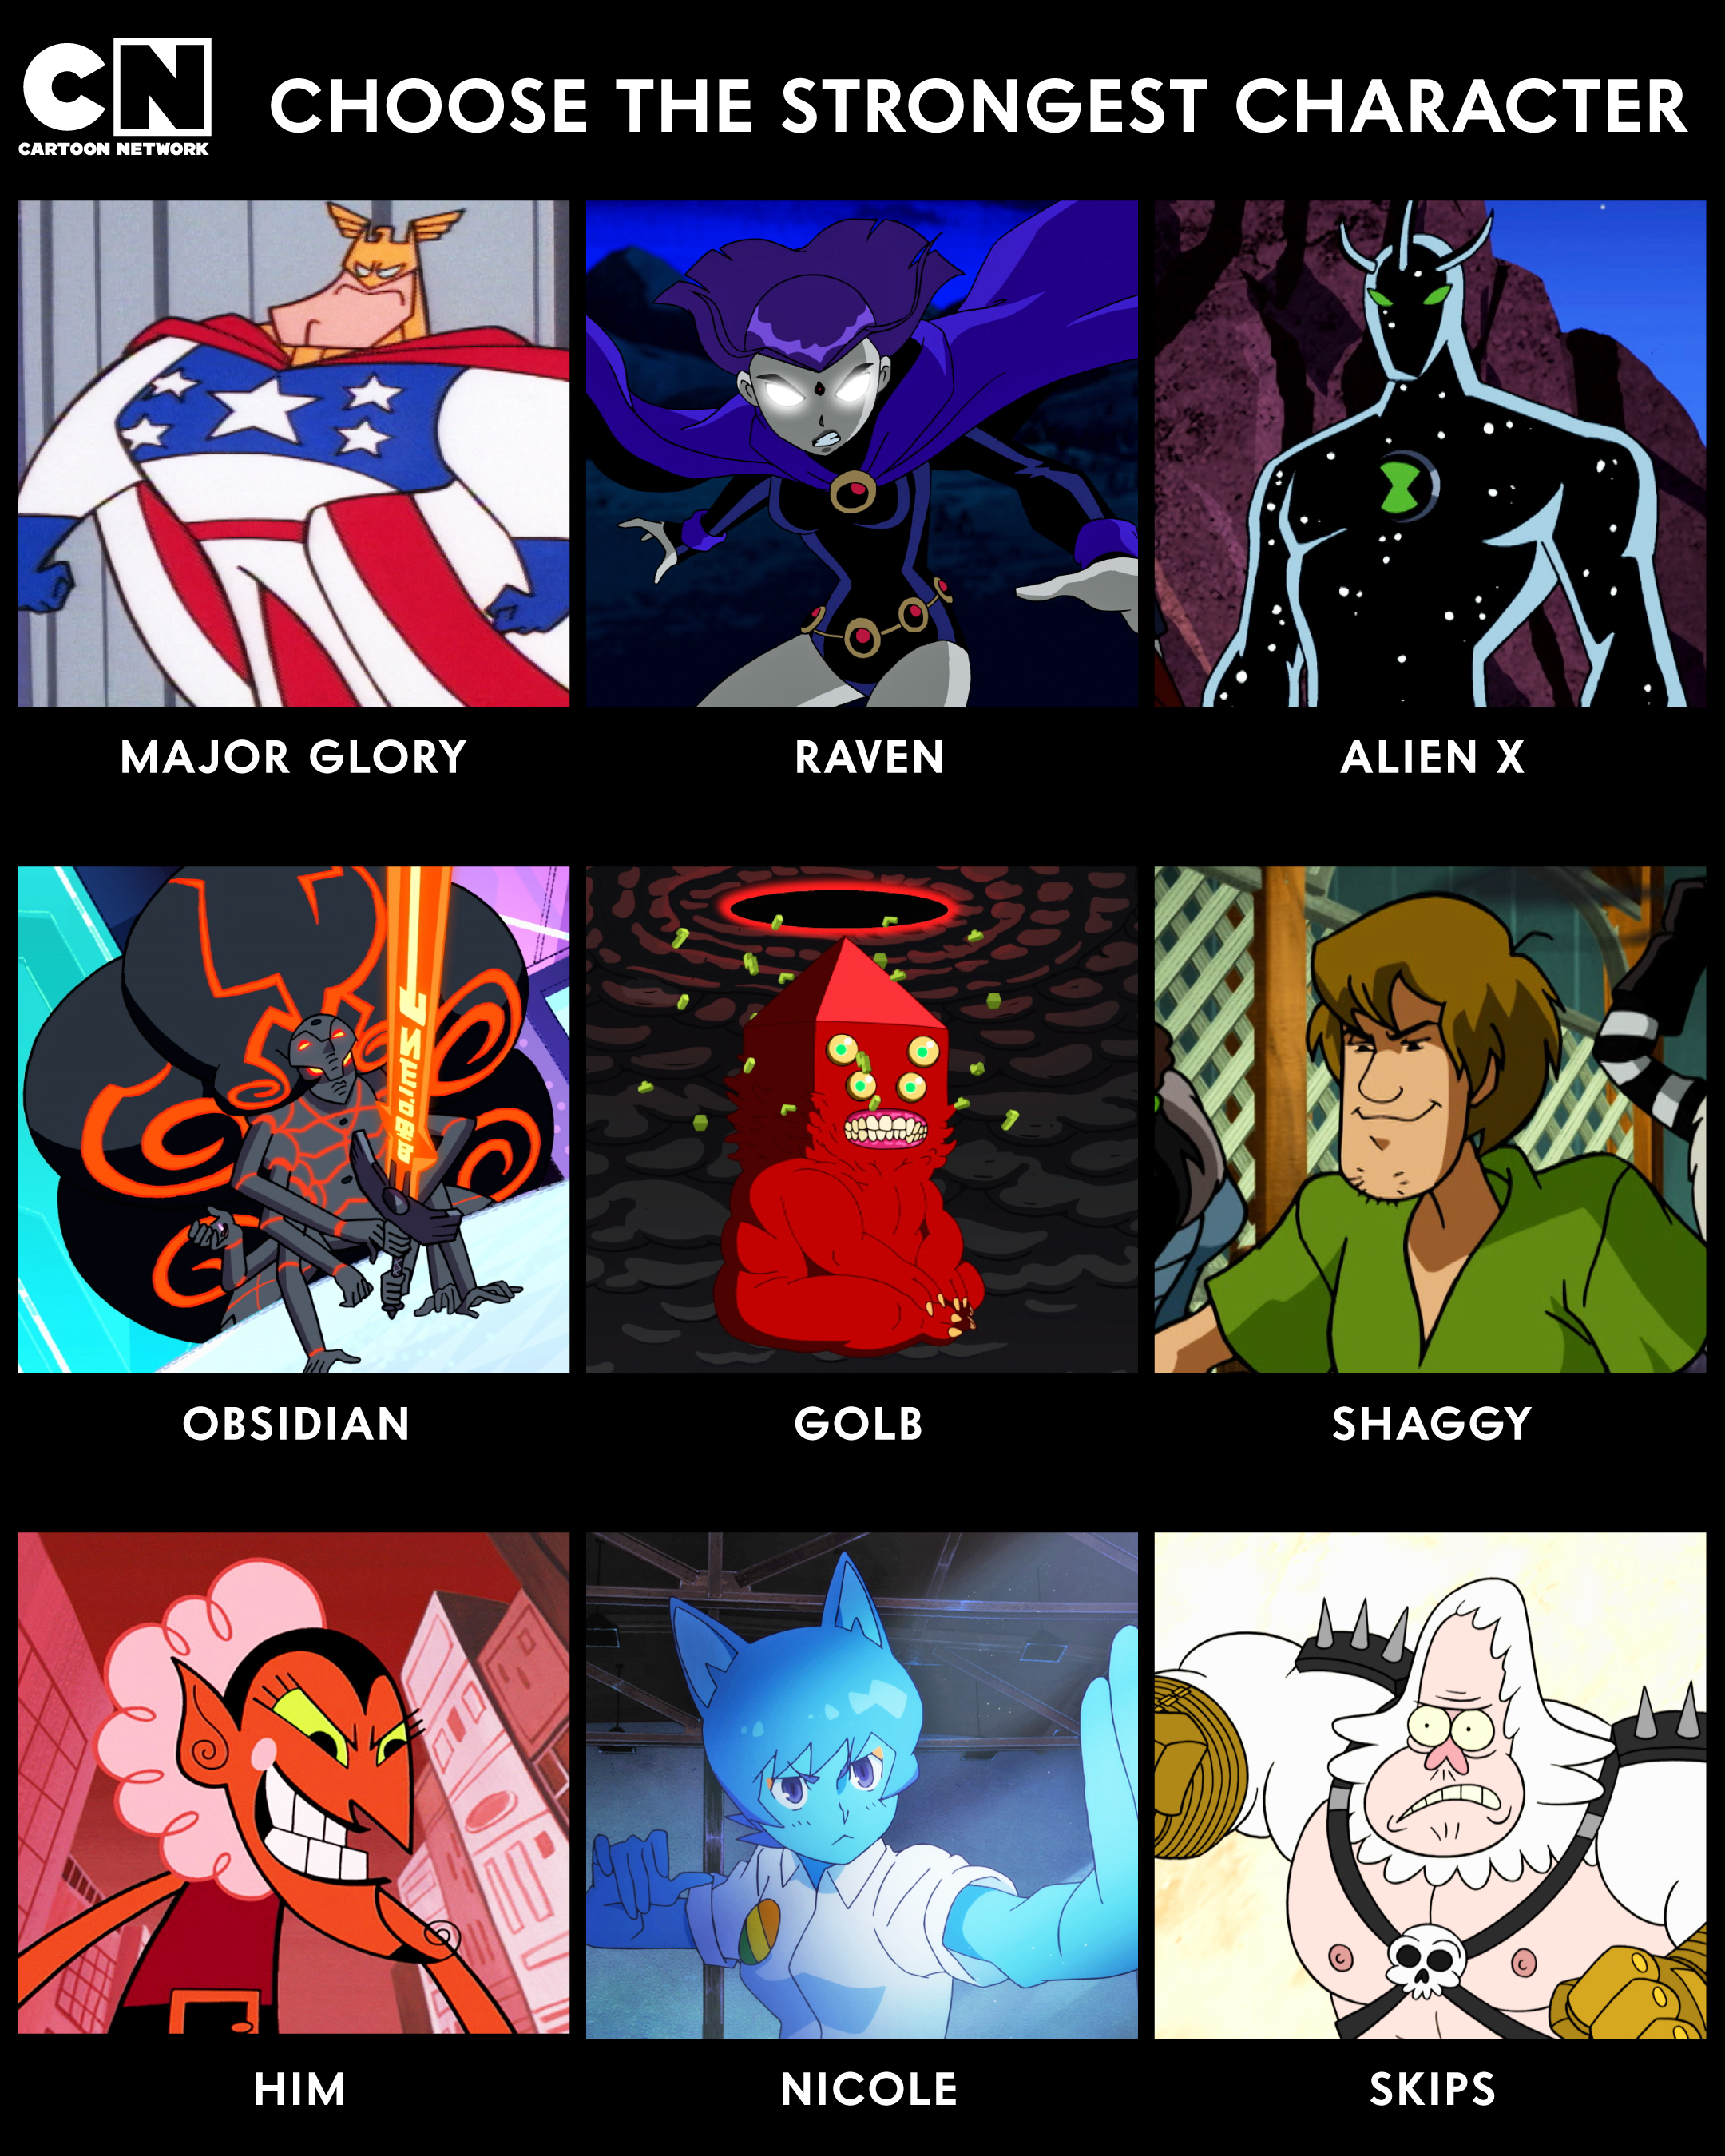 Cartoon Crave on X: 4 Cartoon Network shows. 2 must go. 2 can stay. What  are your picks? 👀  / X